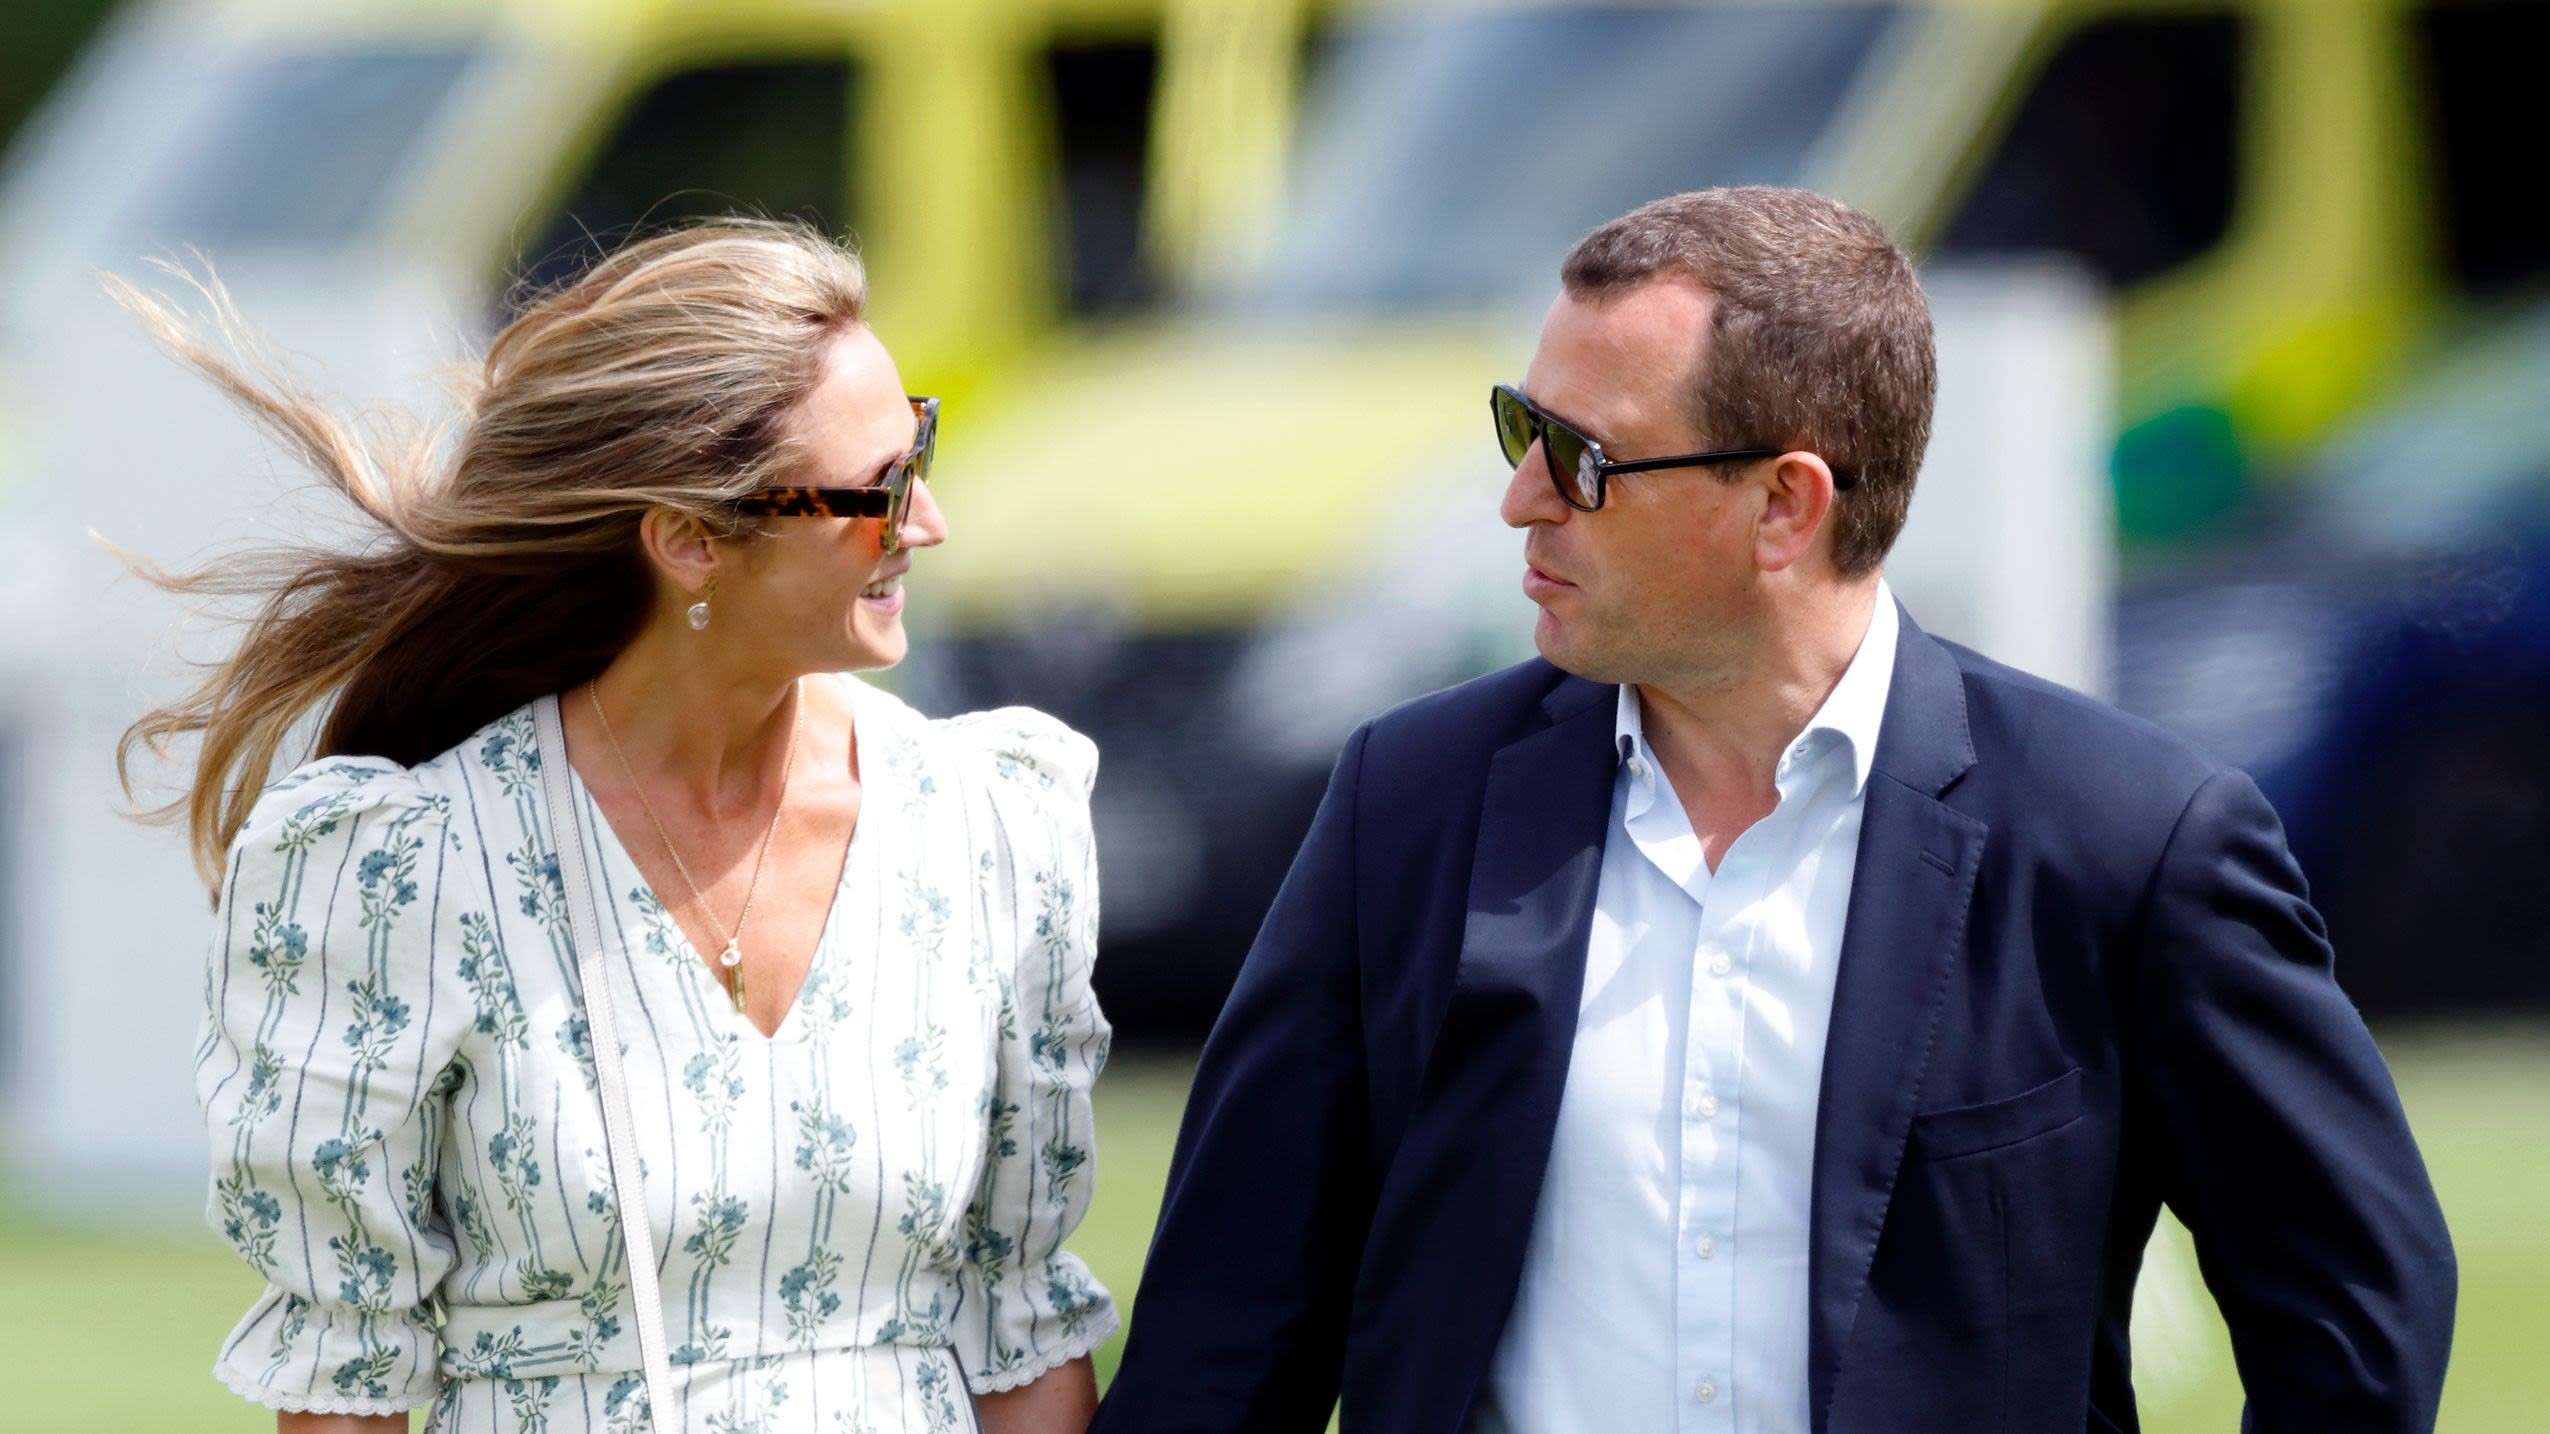 Peter Phillips and His New Girlfriend Harriet Sperling Attend Polo Match Together